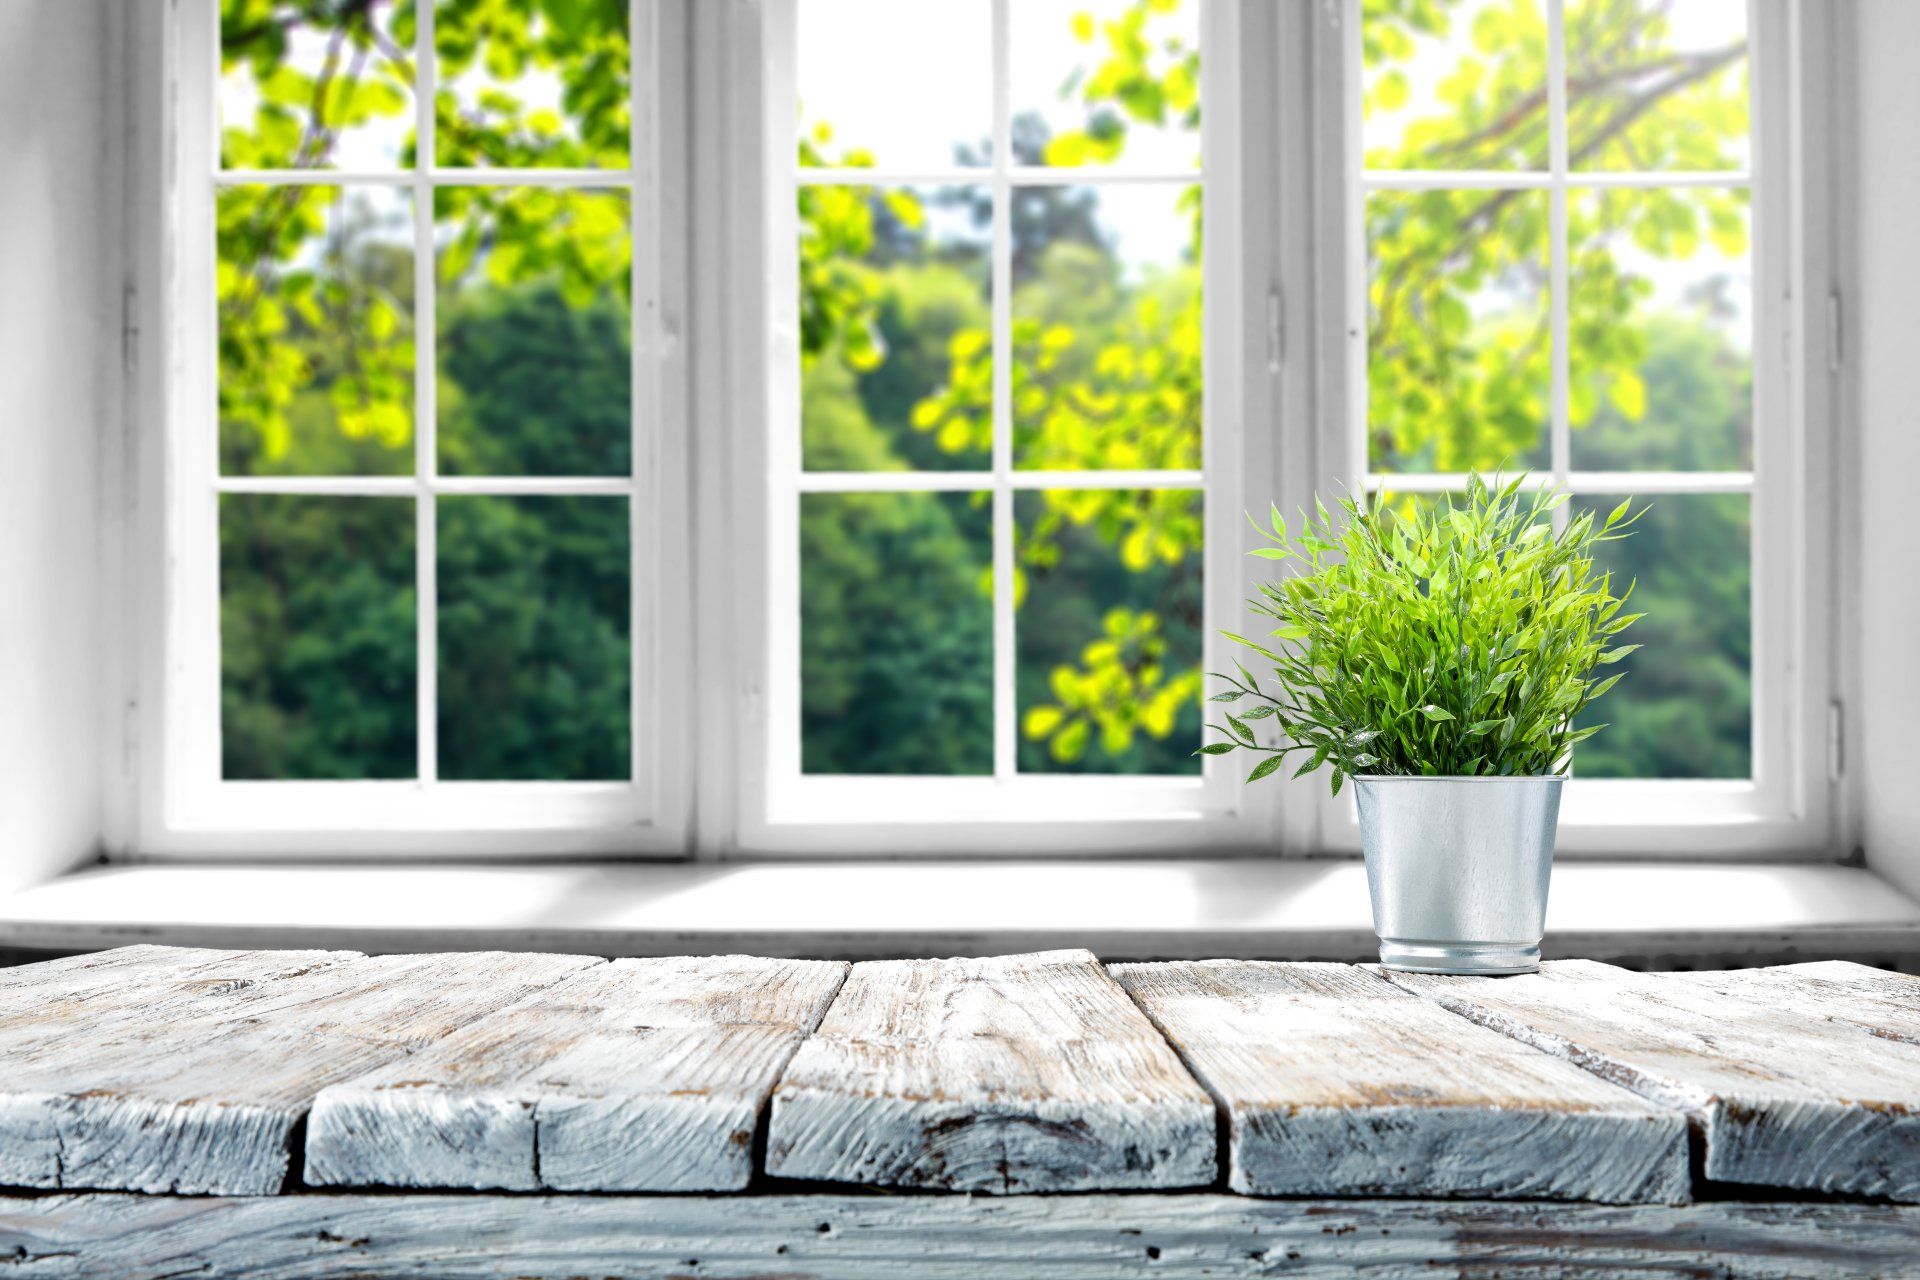 A potted plant is sitting on a wooden table in front of a window.